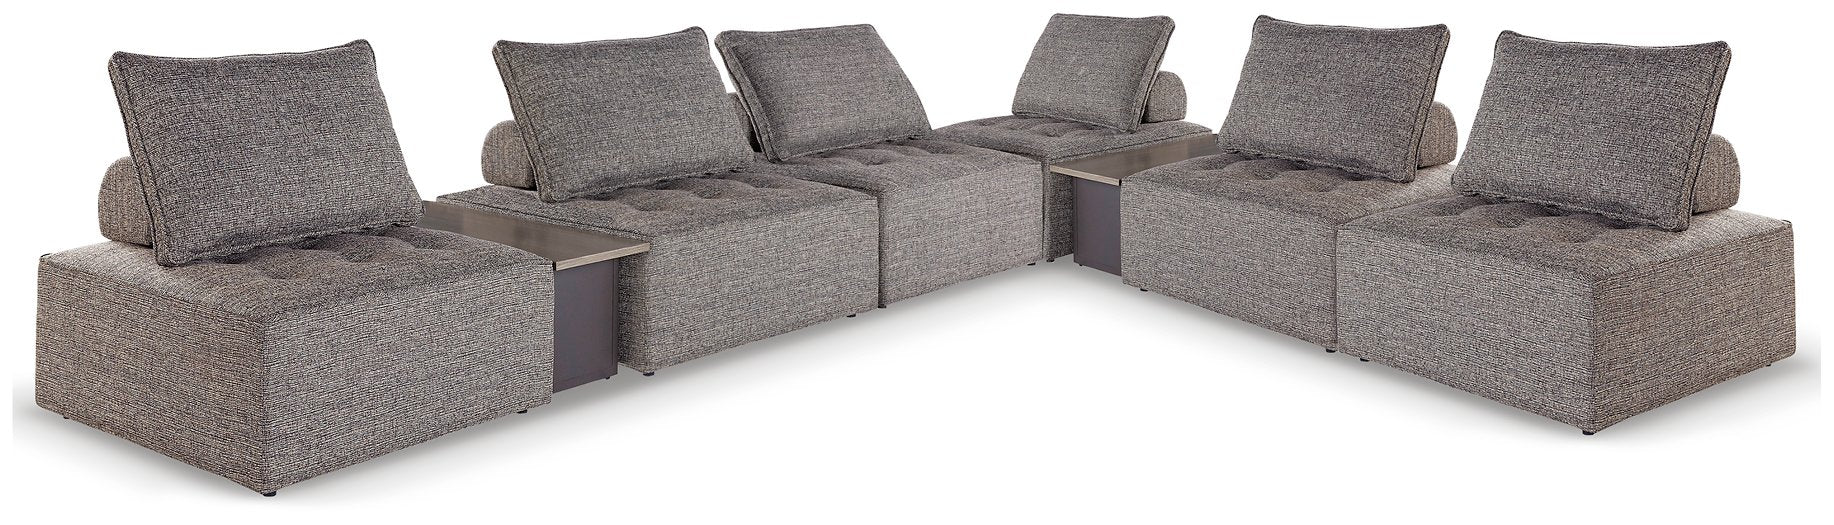 Bree Zee Outdoor Modular Seating - Home And Beyond